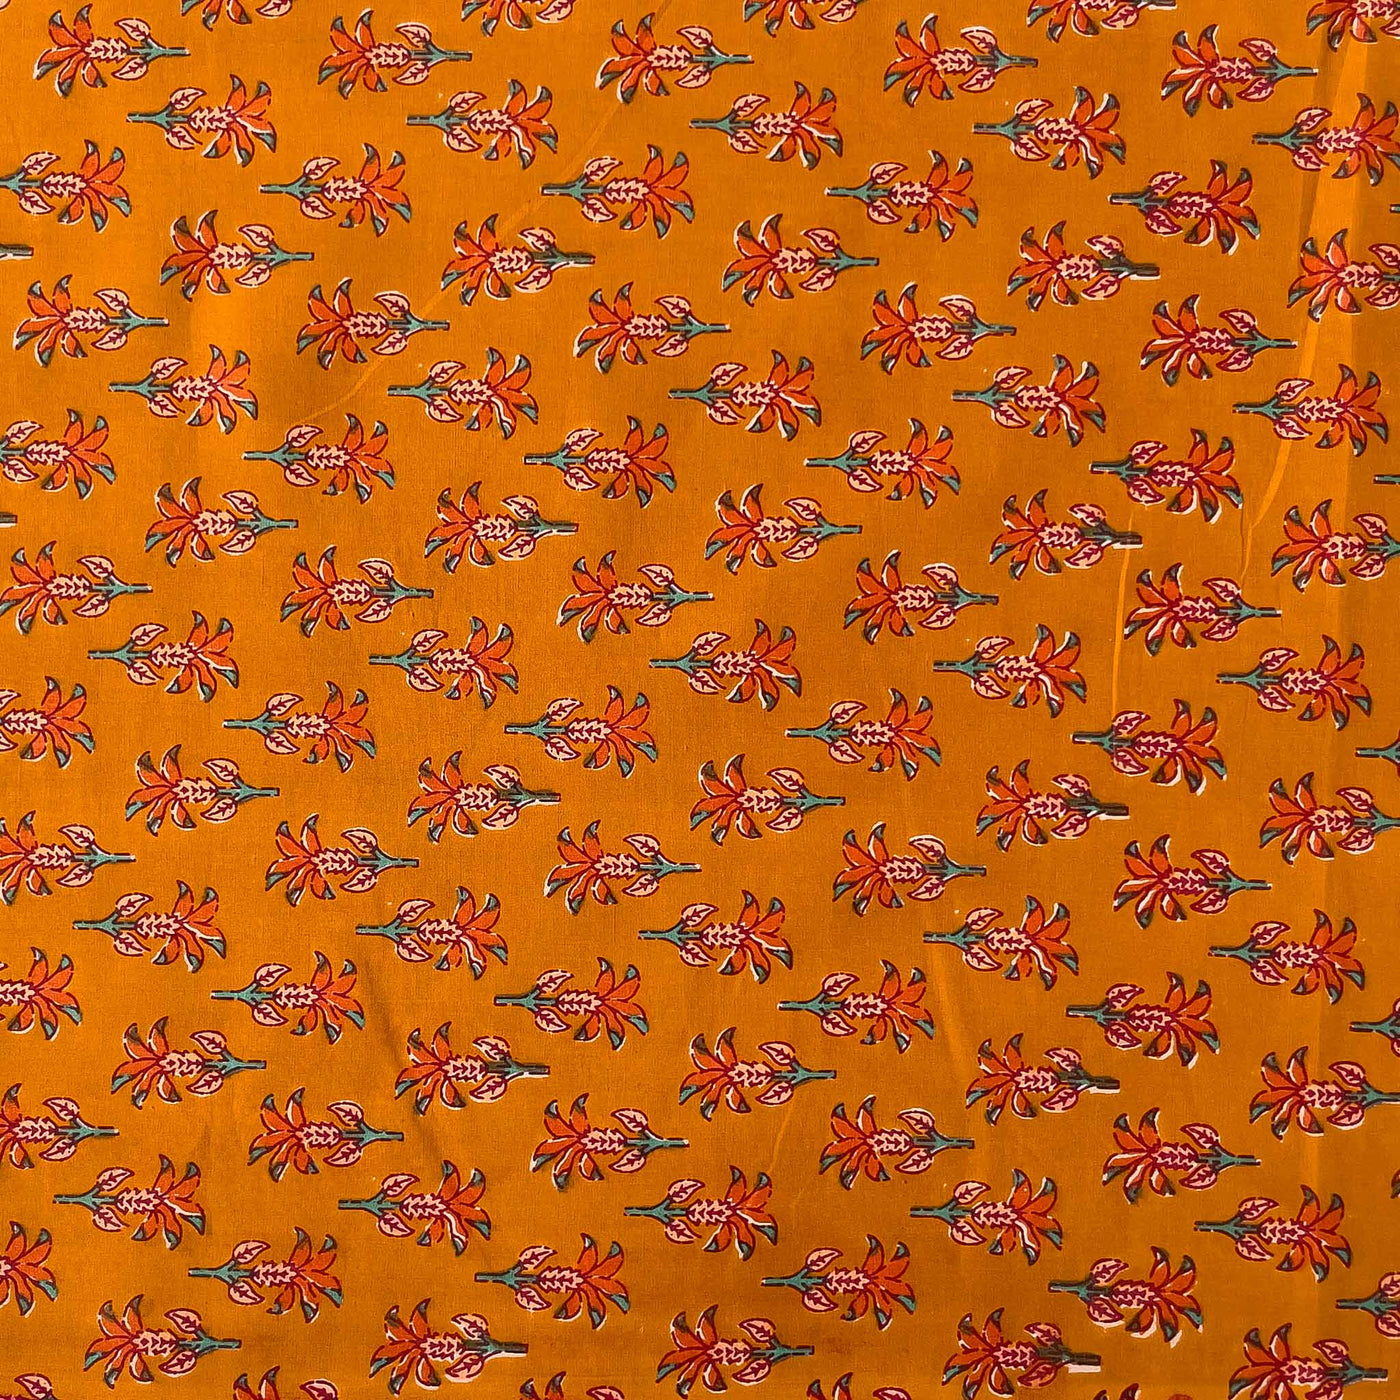 Fabric Pandit Cut Piece (CUT PIECE) Rust and Green Abstract Floral Pattern Screen Printed Pure Cotton Fabric (Width 43 inches)